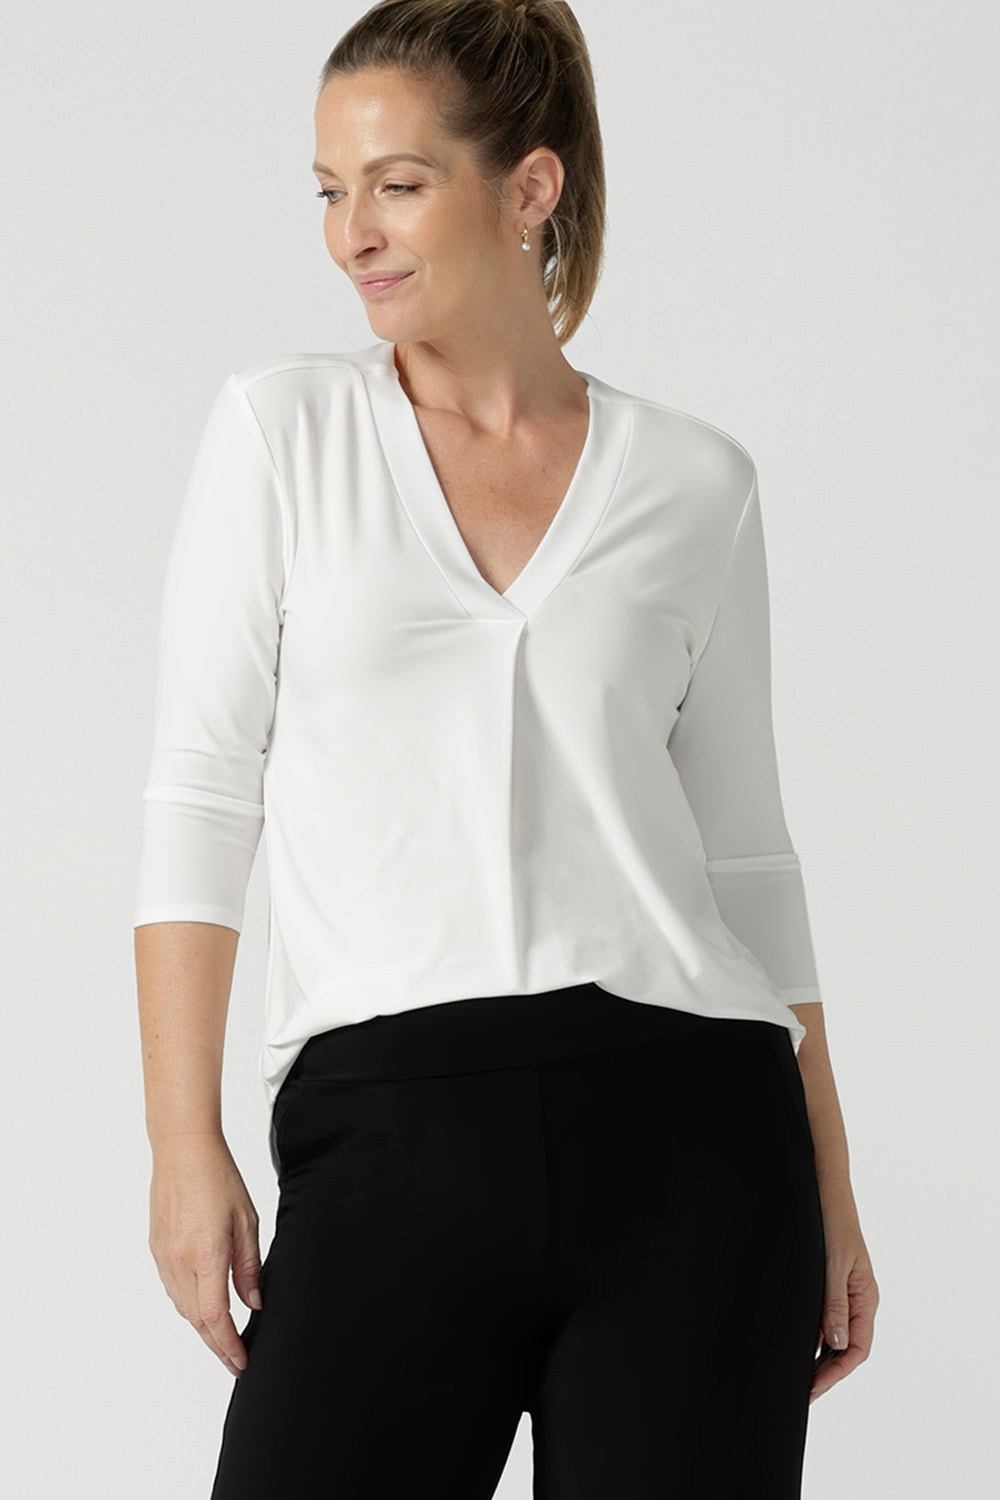 A size 10 woman wears the Jaime top in Vanilla. A comfortable workwear top for women in soft dry touch easy care versey. Featuring a v-neck with pleat front and bind. 3/4 sleeve and made in Australia for women size 8 - 24. 